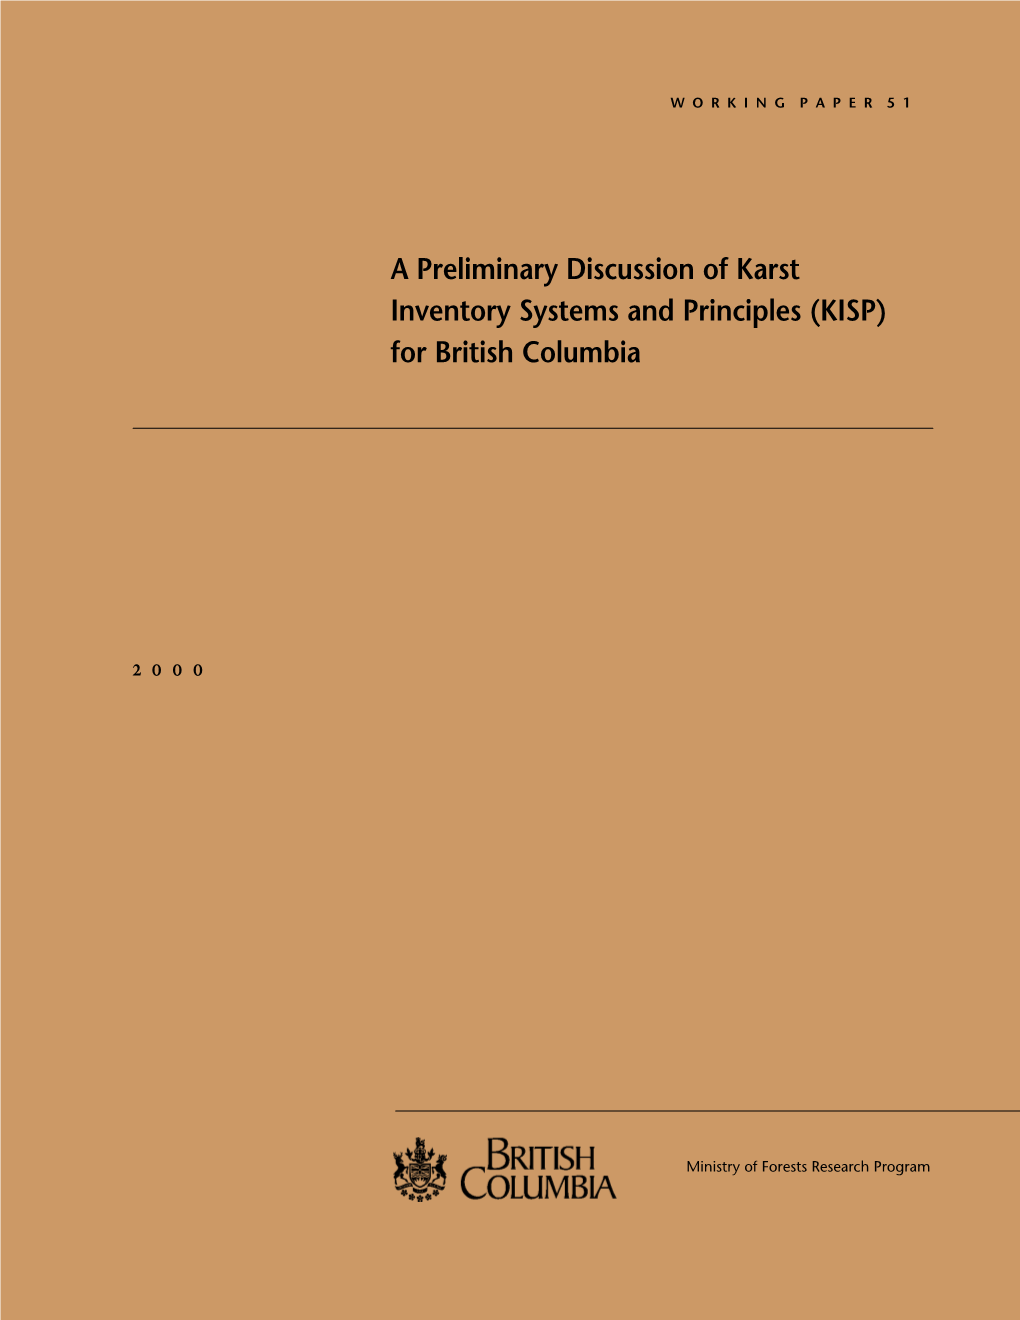 A Preliminary Discussion of Karst Inventory Systems and Principles (KISP) for British Columbia